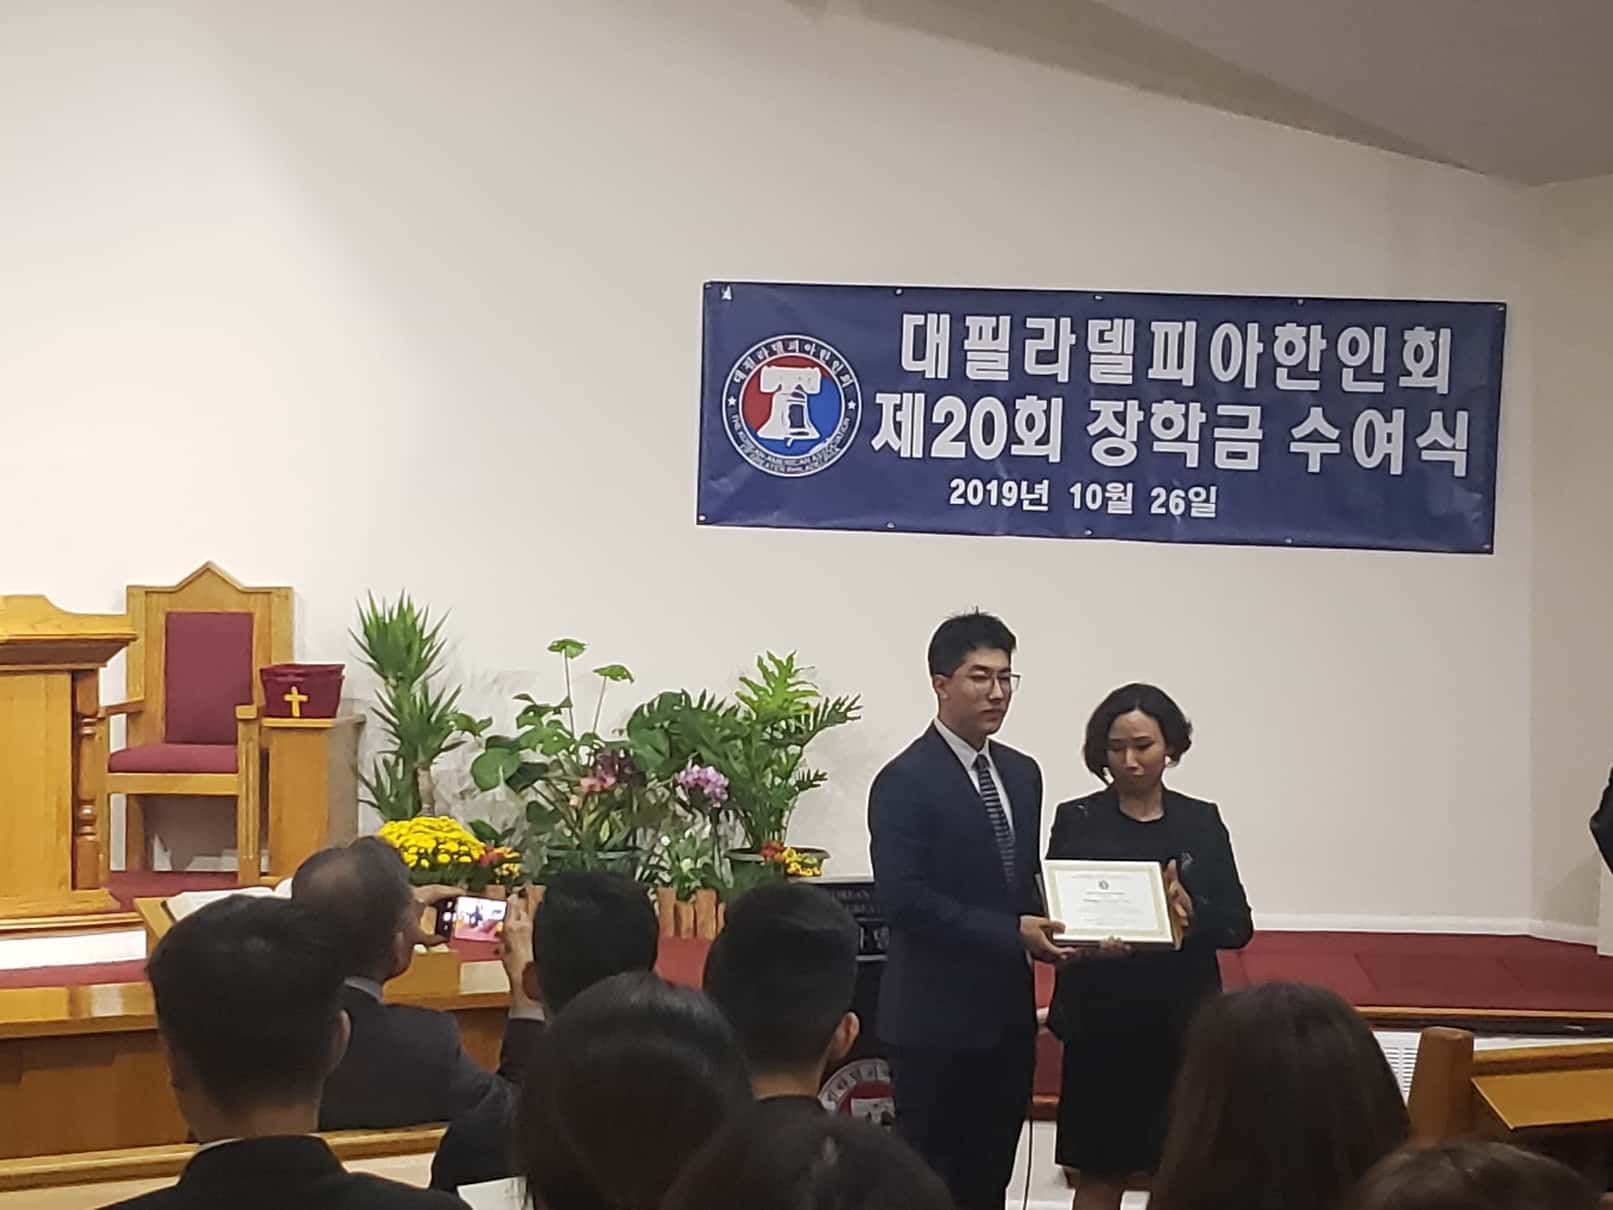 kaagpsf's scholarship and event in 2020